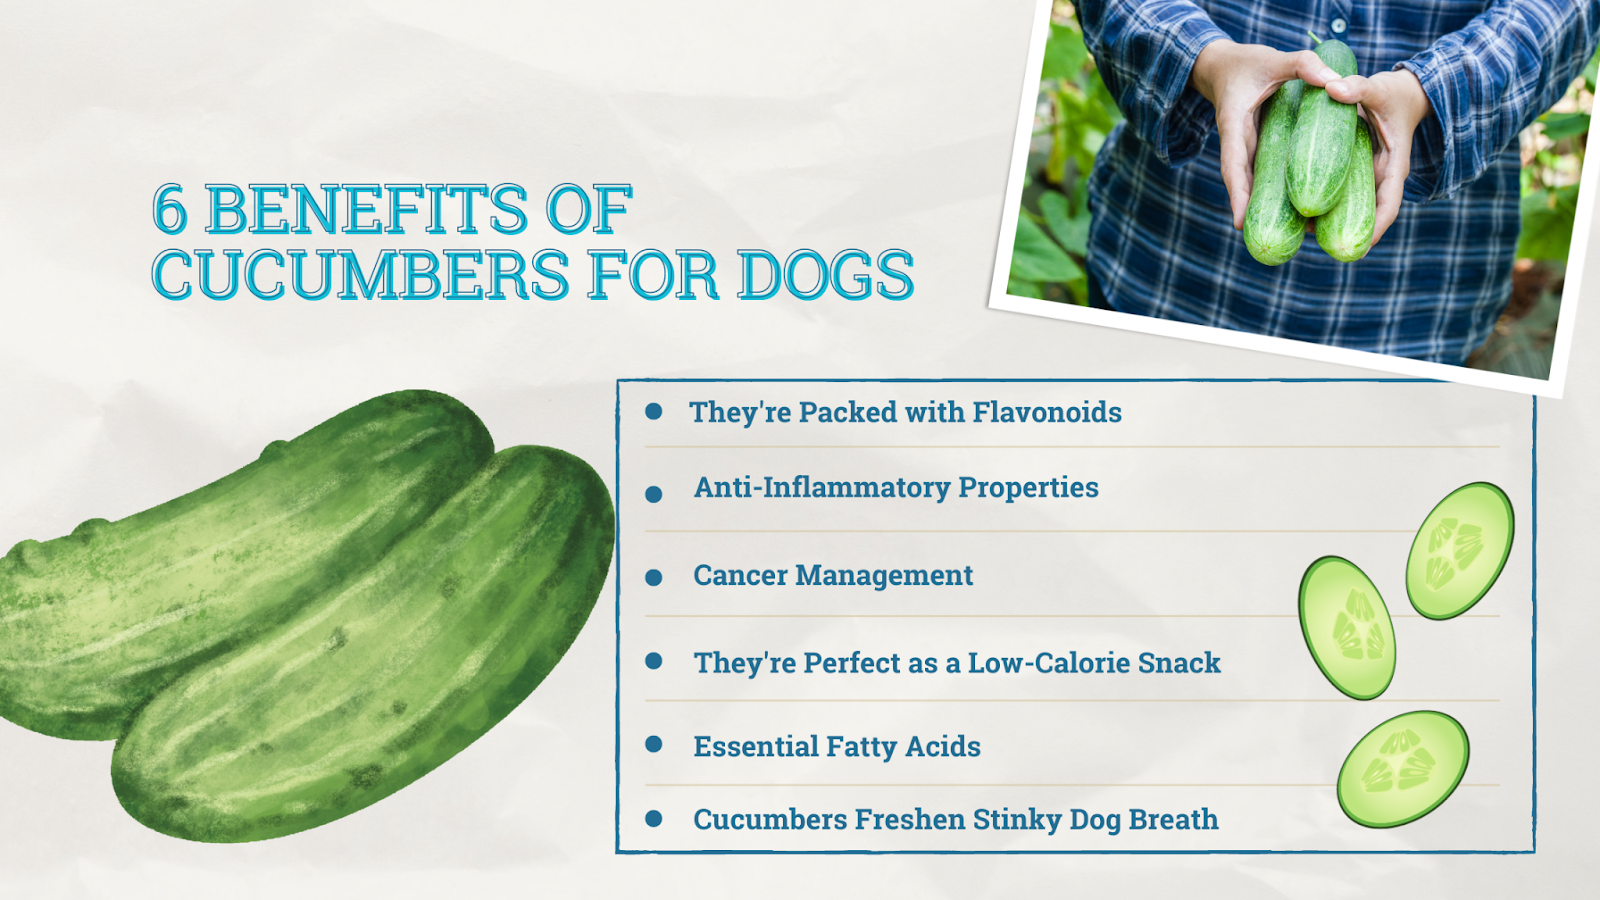 6 benefits of cucumbers for dogs